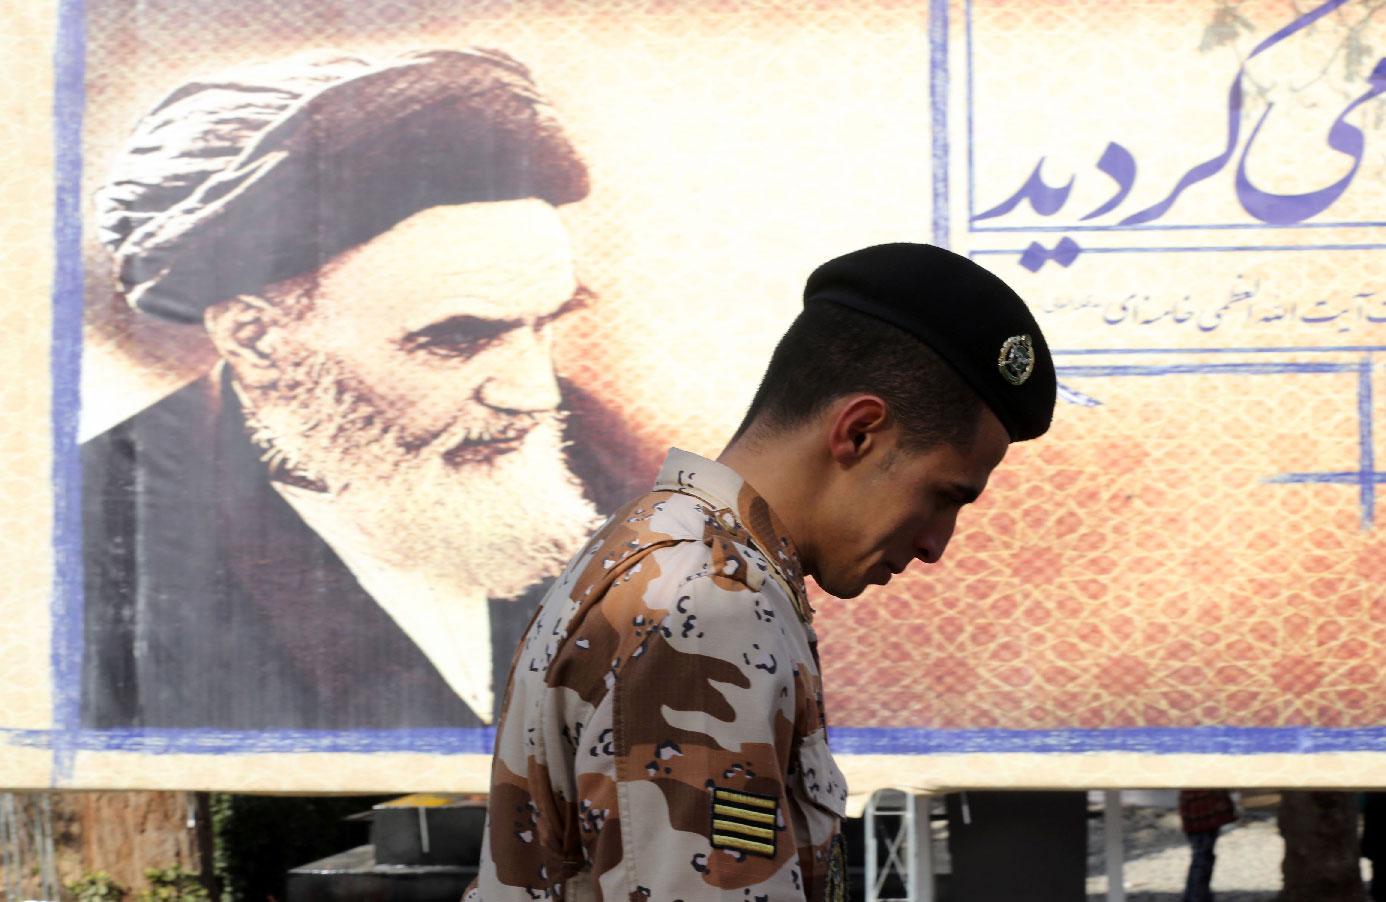 An Iranian soldier walks past a giant board displaying a portrait of the late founder of the Islamic Revolution Ayatollah Ruhollah Khomeini.